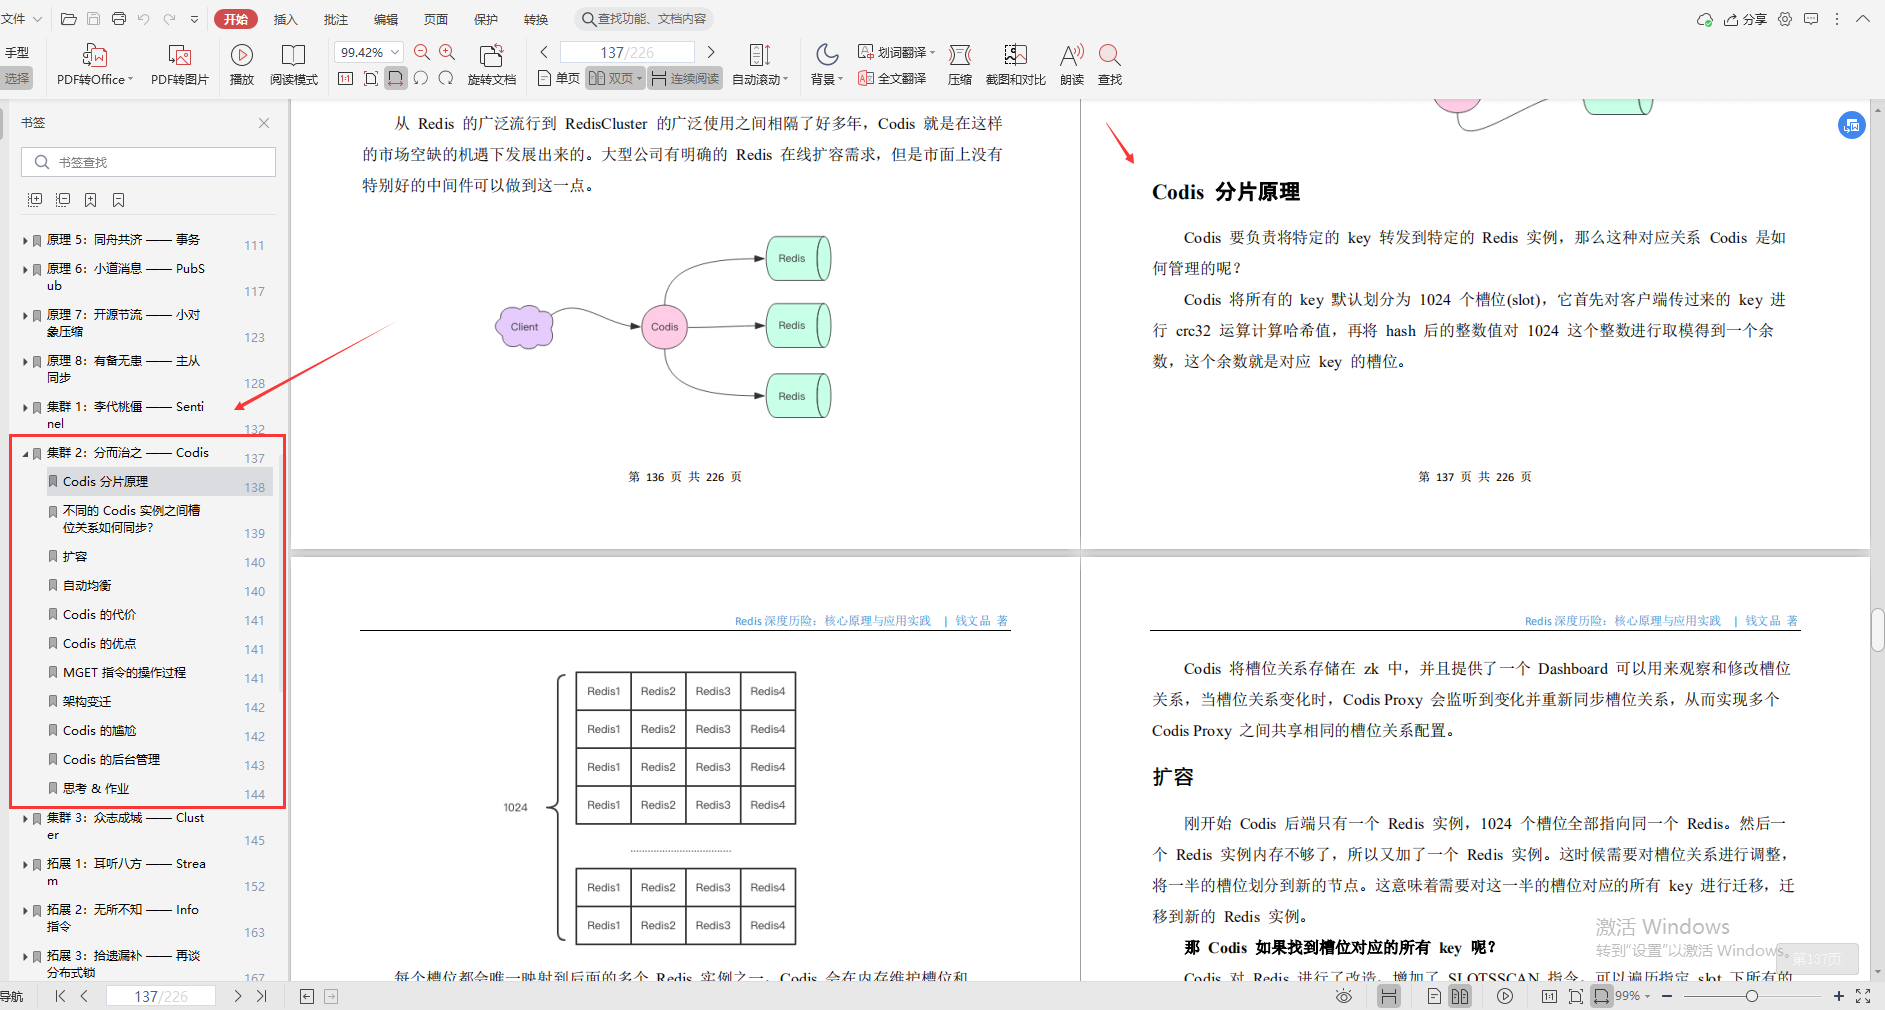 Tencent Cloud God’s code "redis depth notes", don’t say a word of nonsense, it’s all the essence